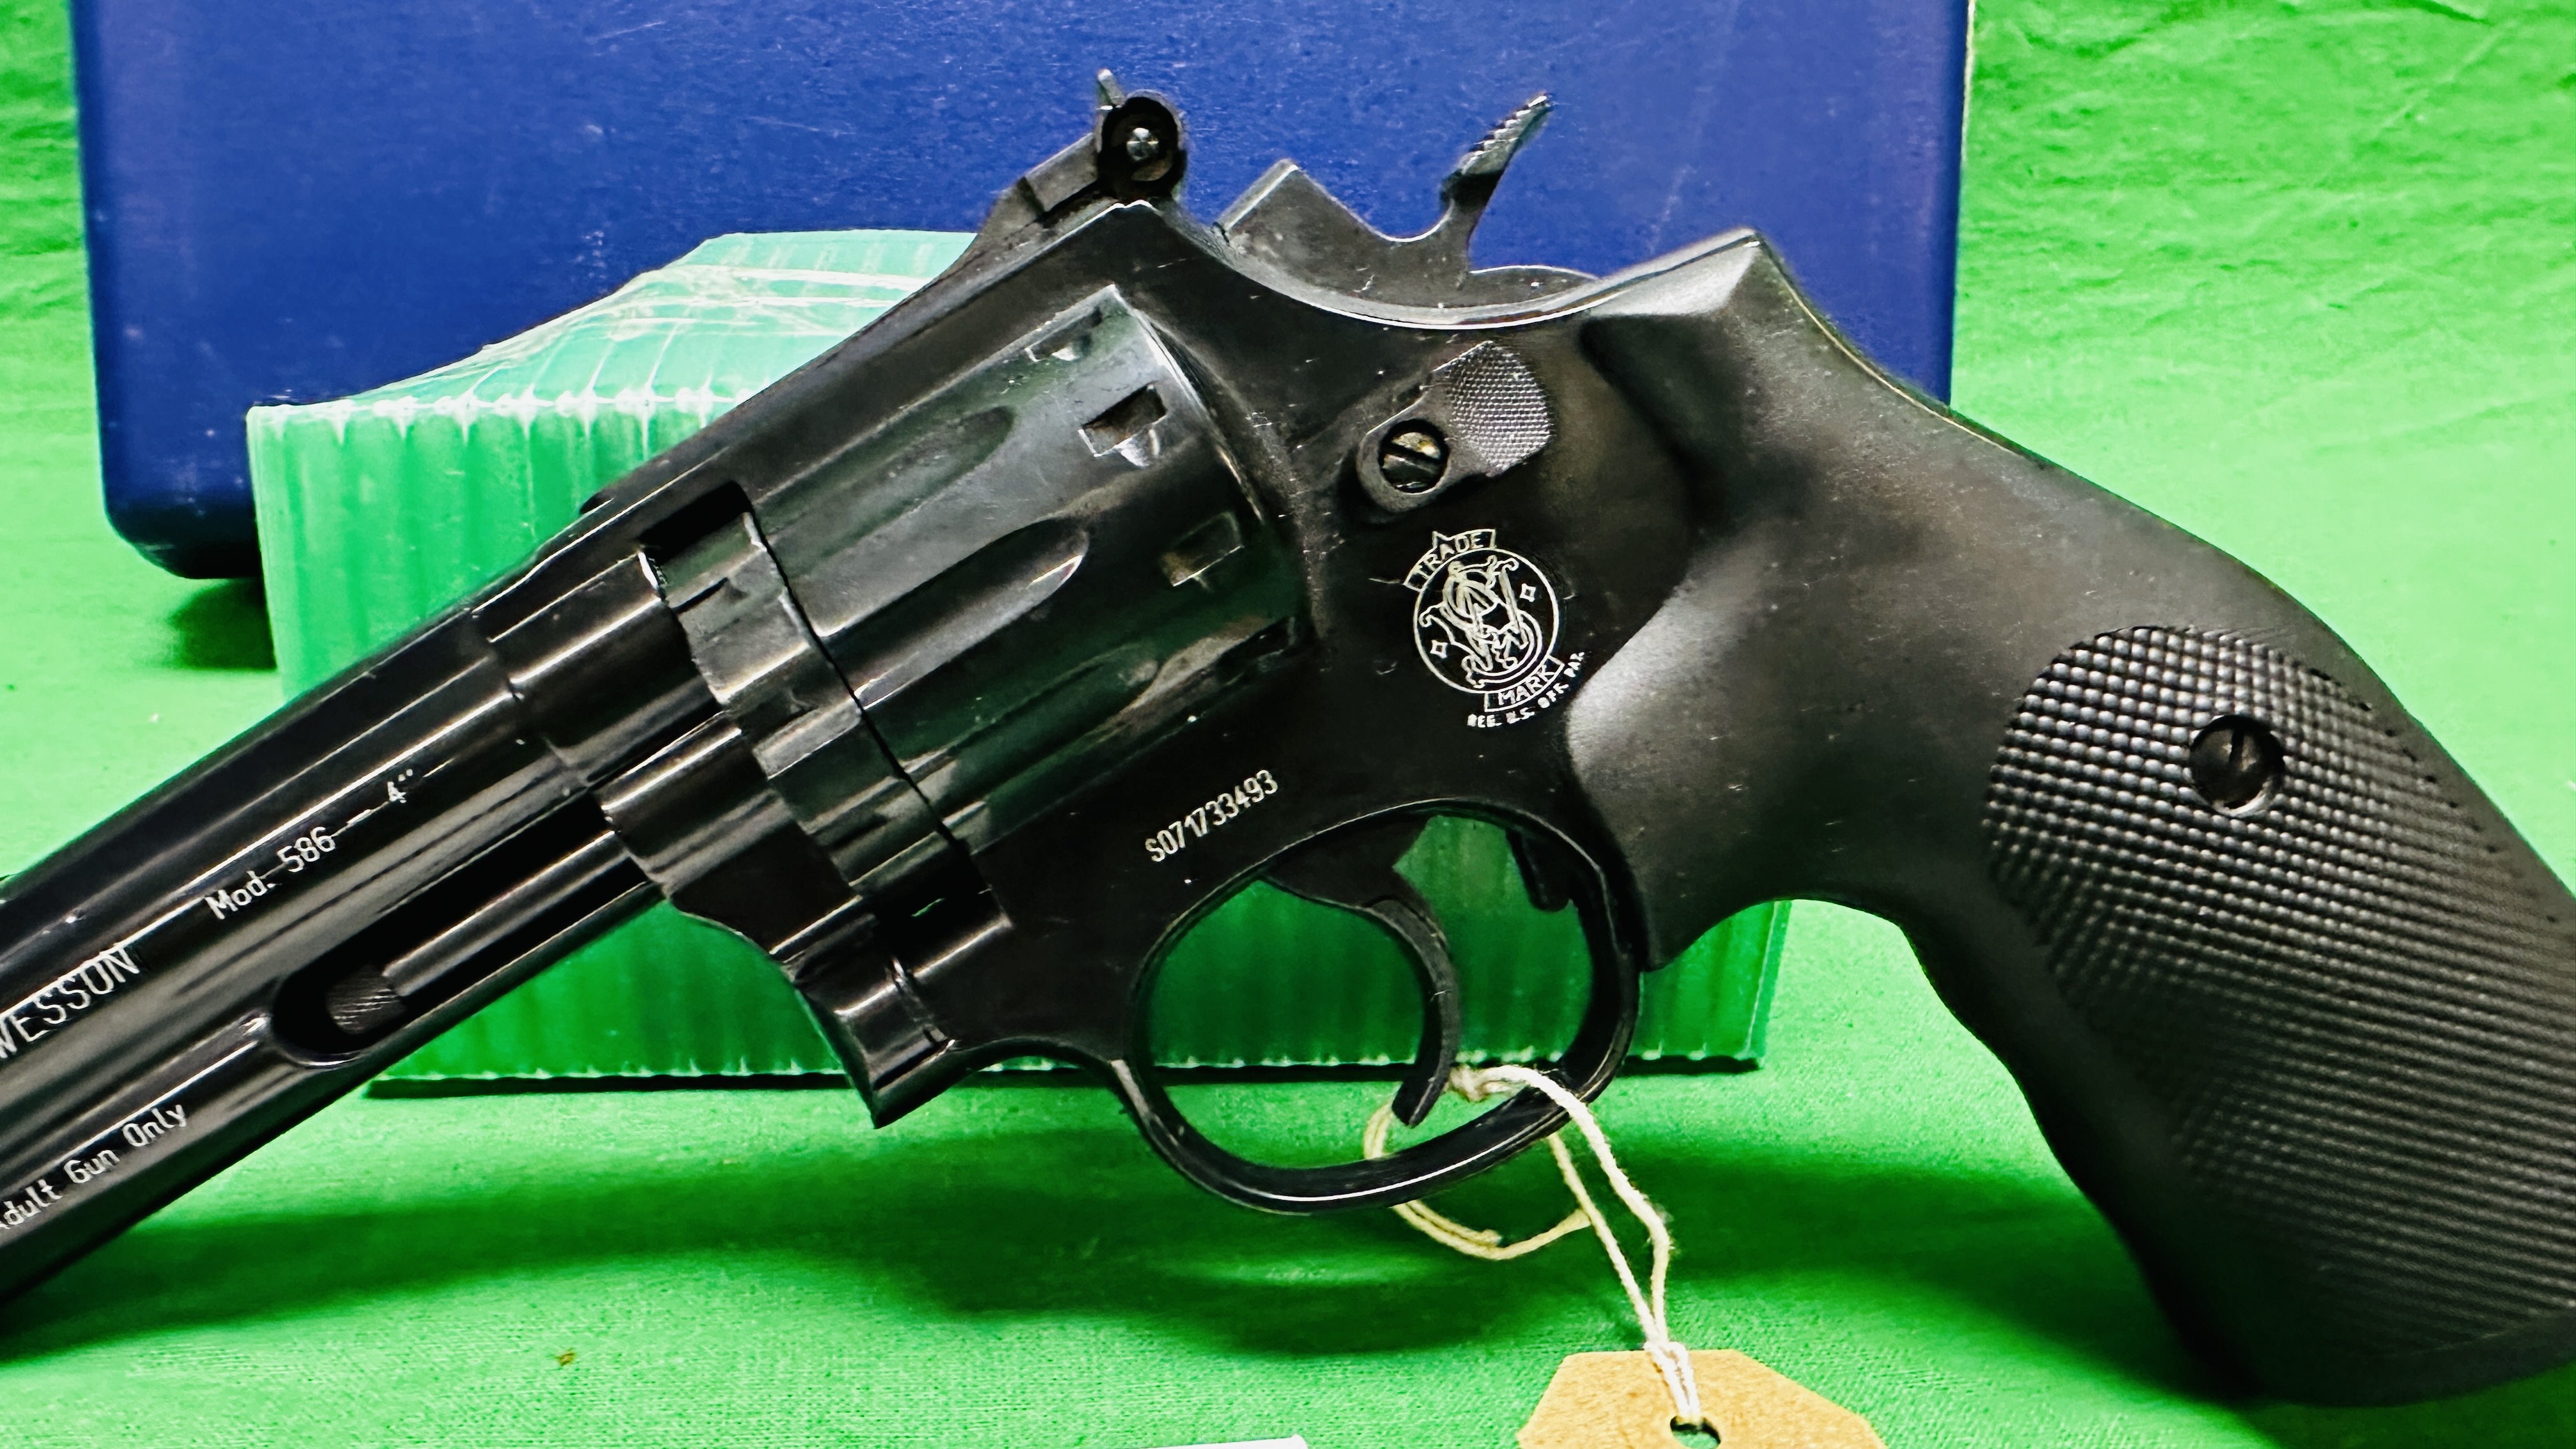 AN UMAREX SMITH & WESSON CO2 . - Image 4 of 12